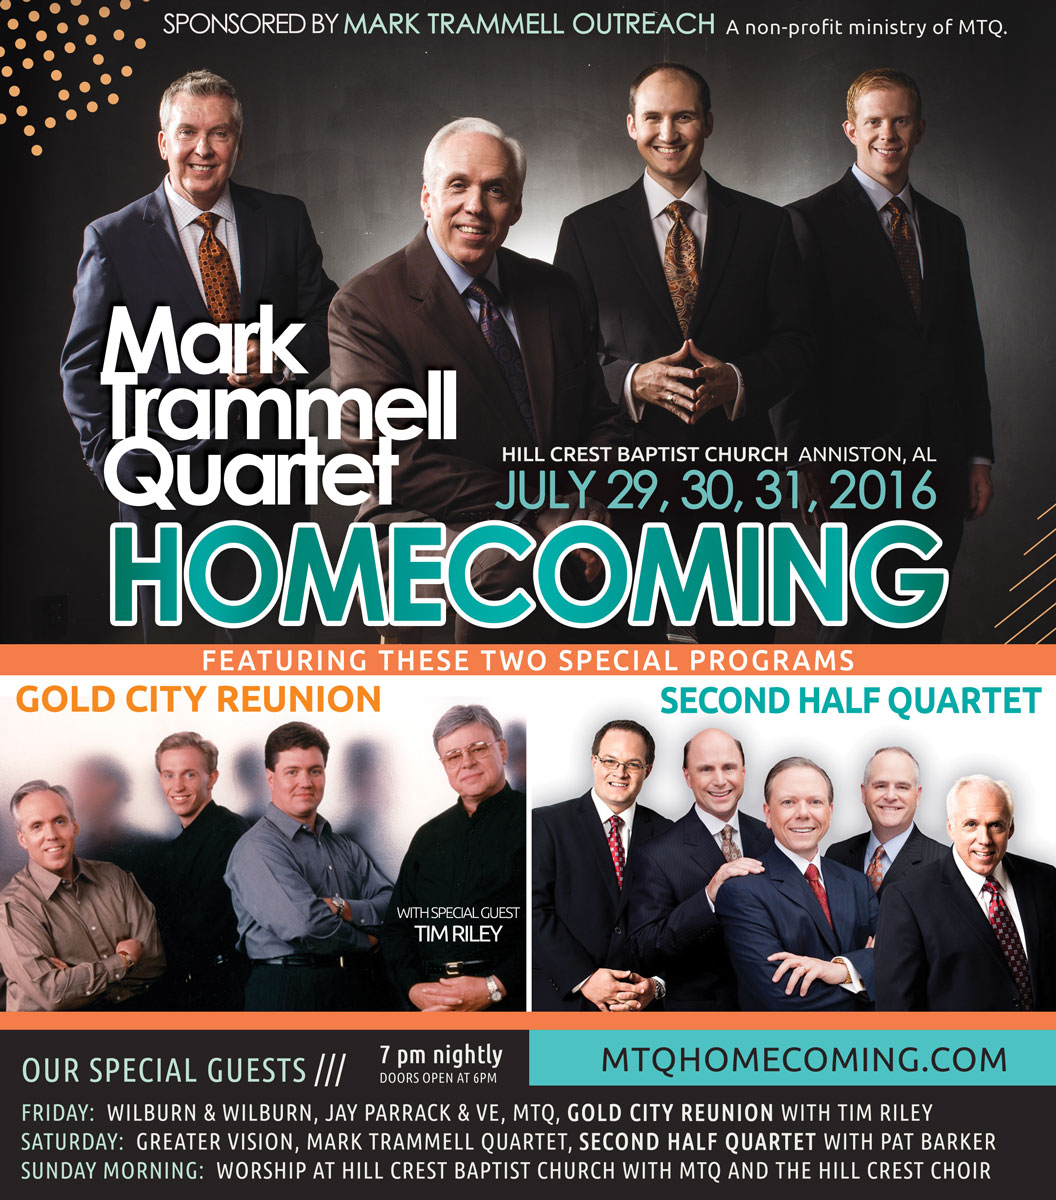 Mark Trammell Announces Homecoming Event!